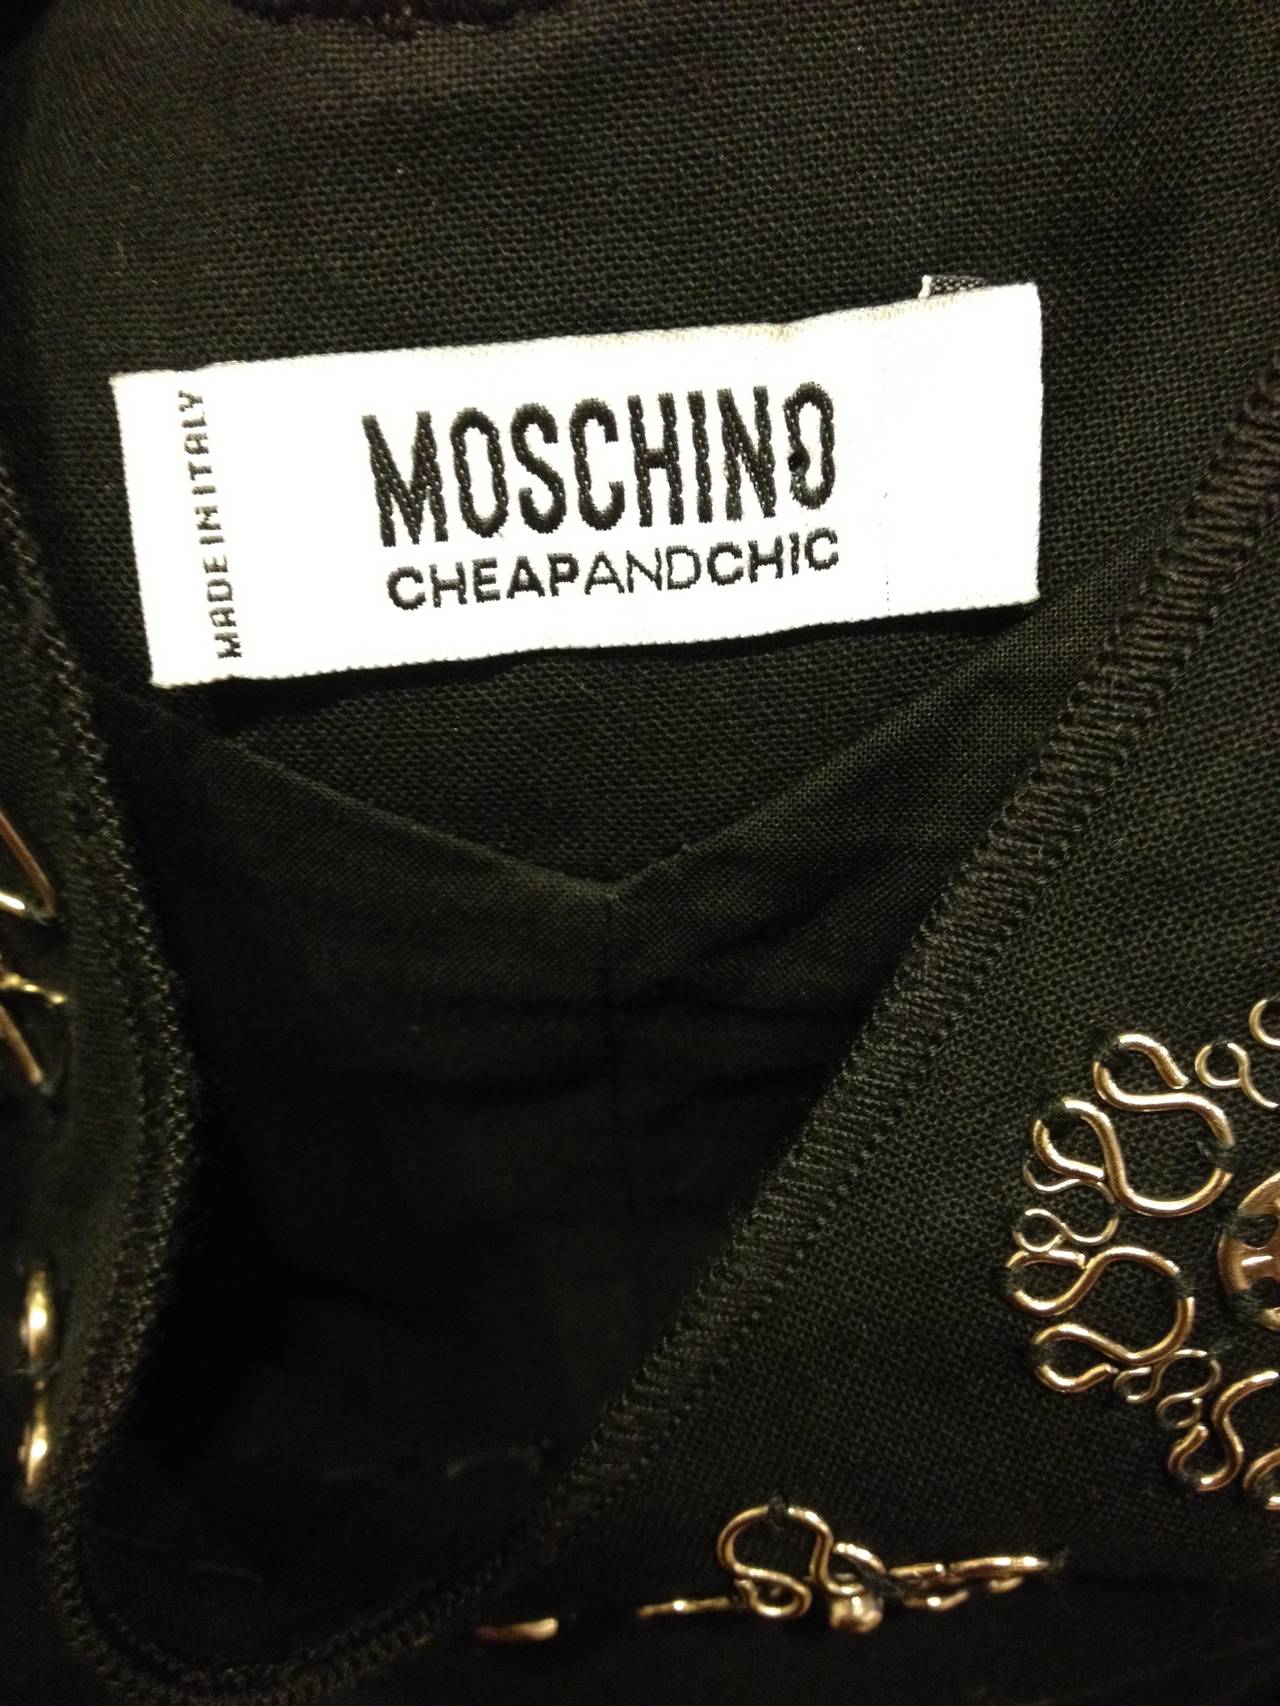 Moschino Cheap & Chic Black Dress with Silver Trim 1